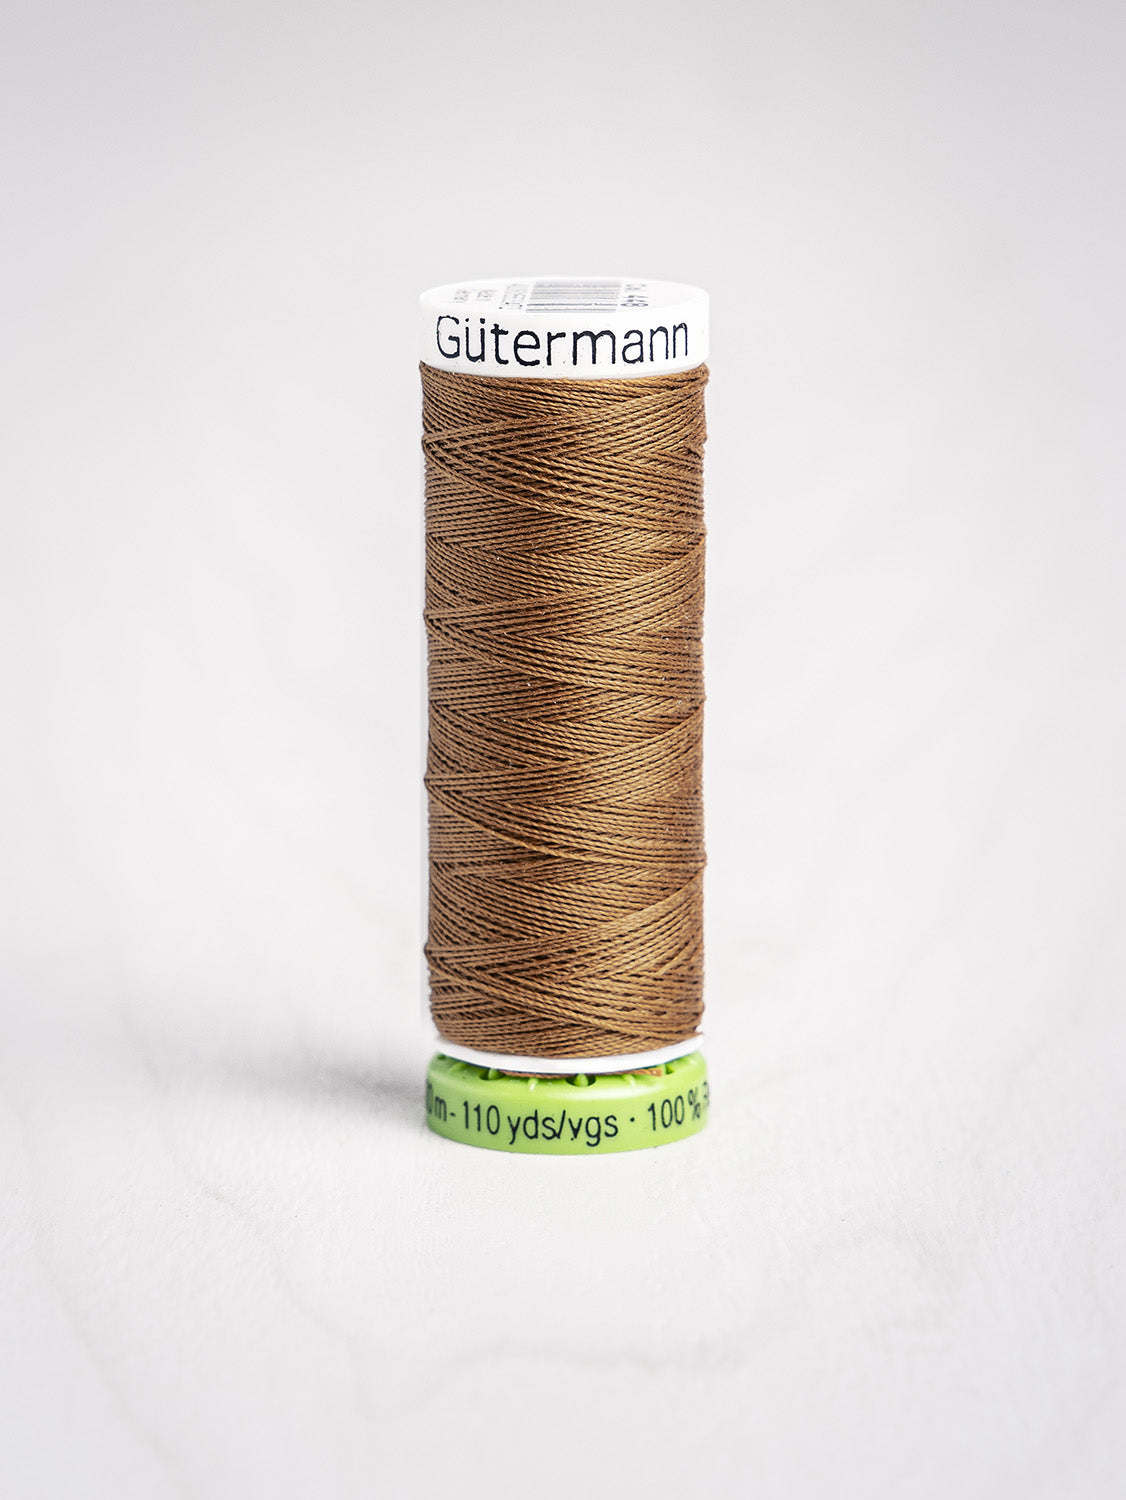 Gütermann All Purpose rPET Recycled Thread - Copper 448 | Core Fabrics